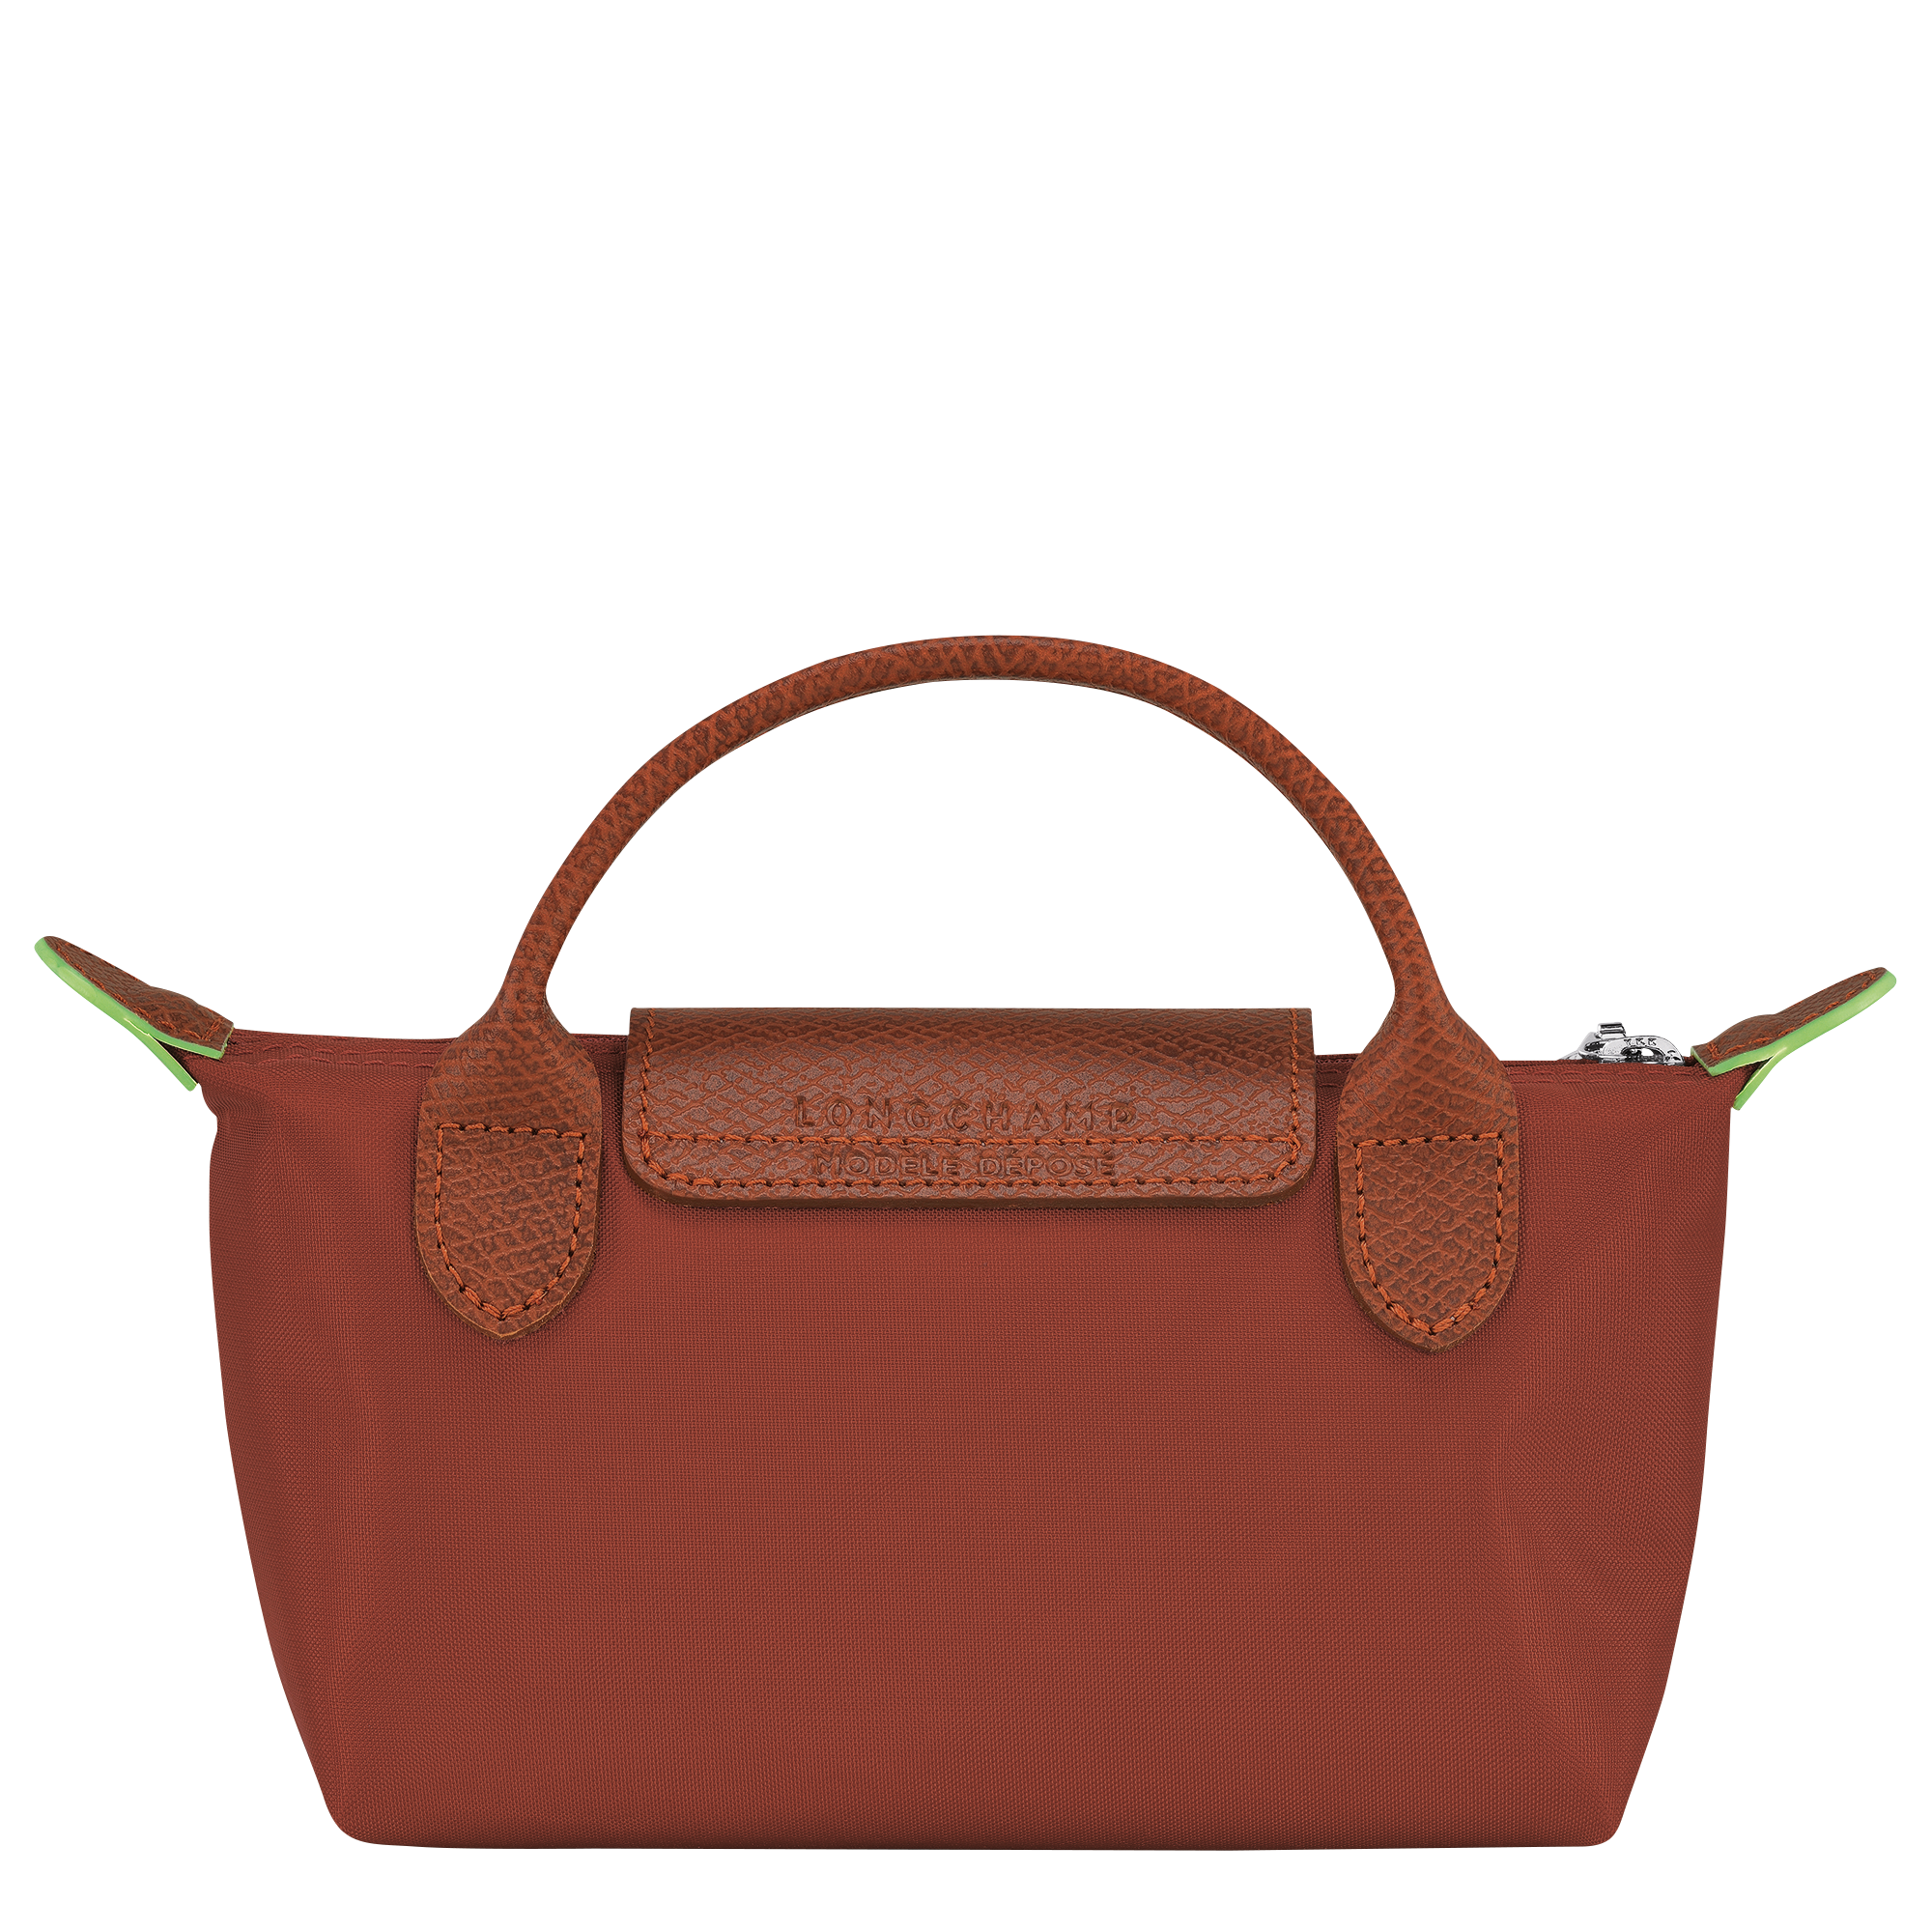 Le Pliage Green Pouch with handle, Chestnut